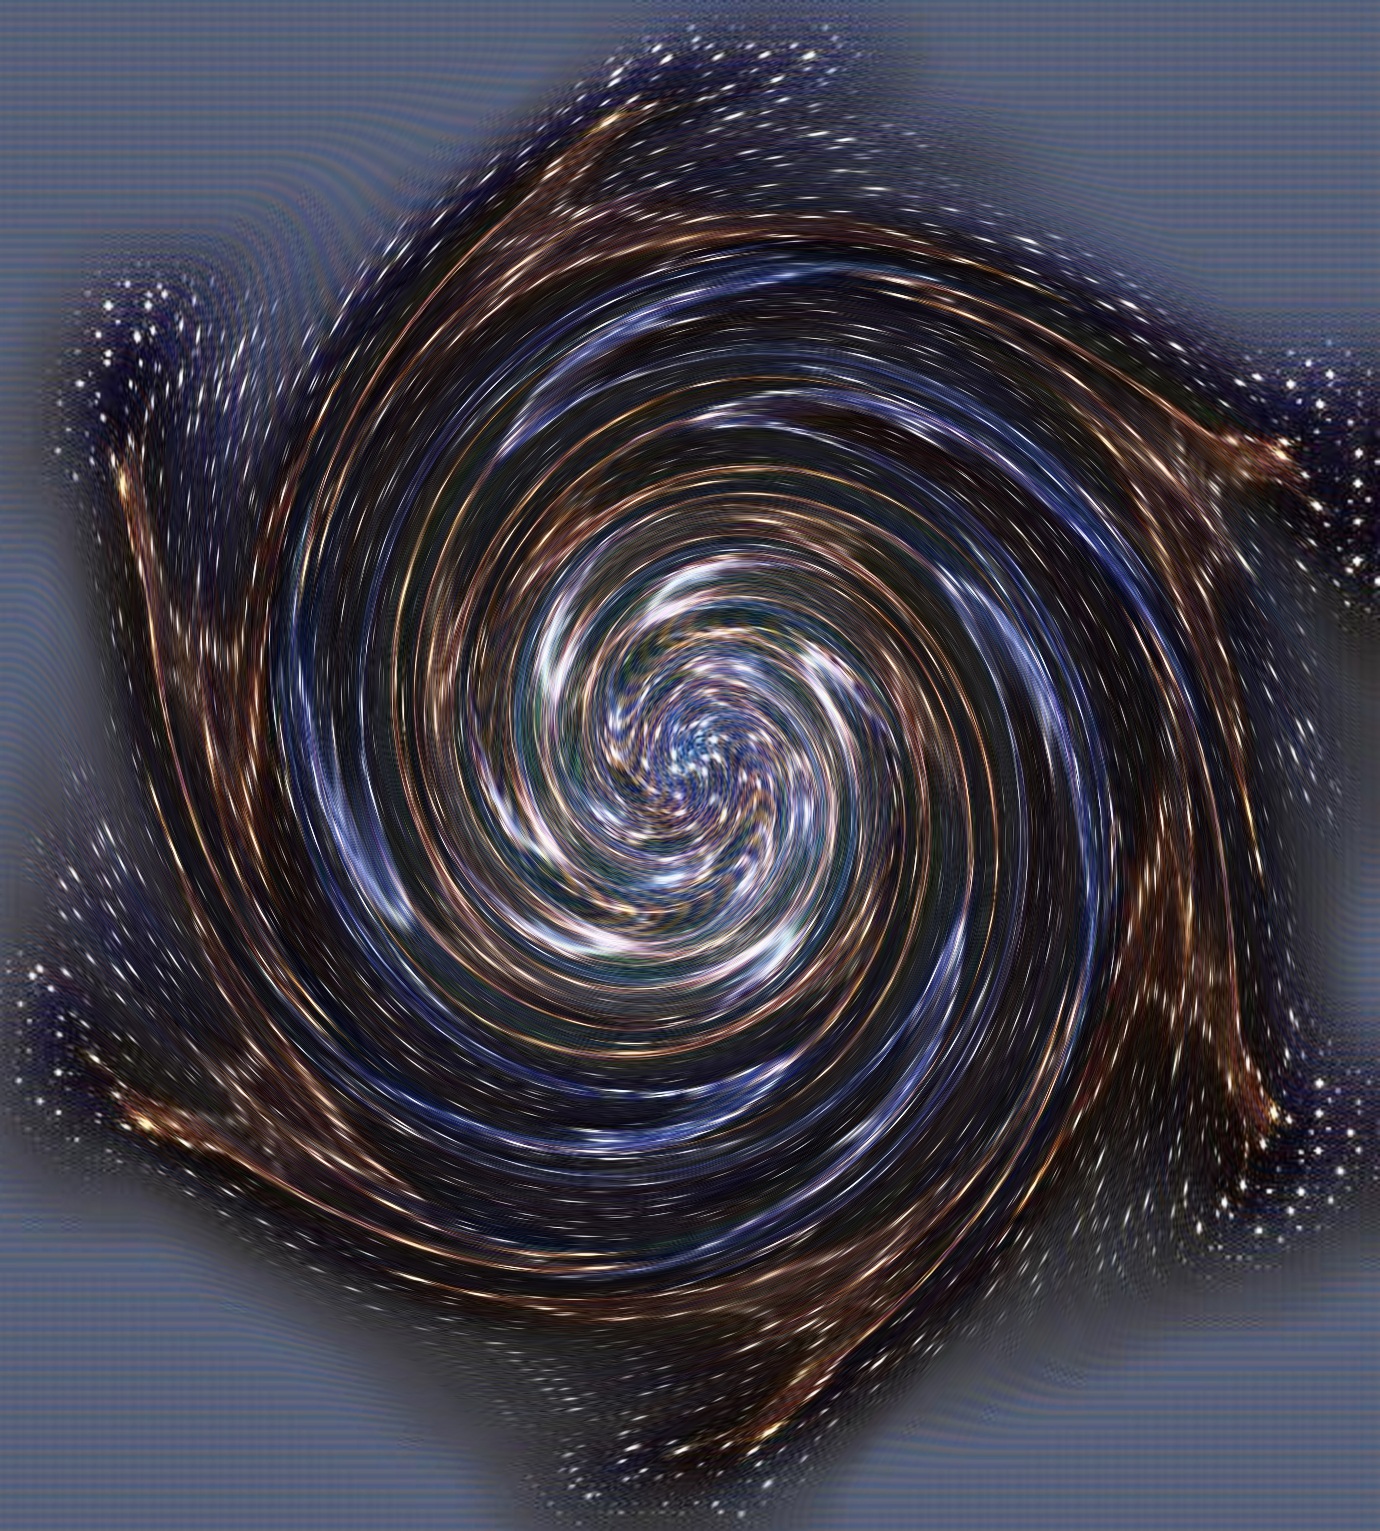 Created by me with weavesilk.com with Space and Swirl x 511 effects on LunaPic.com